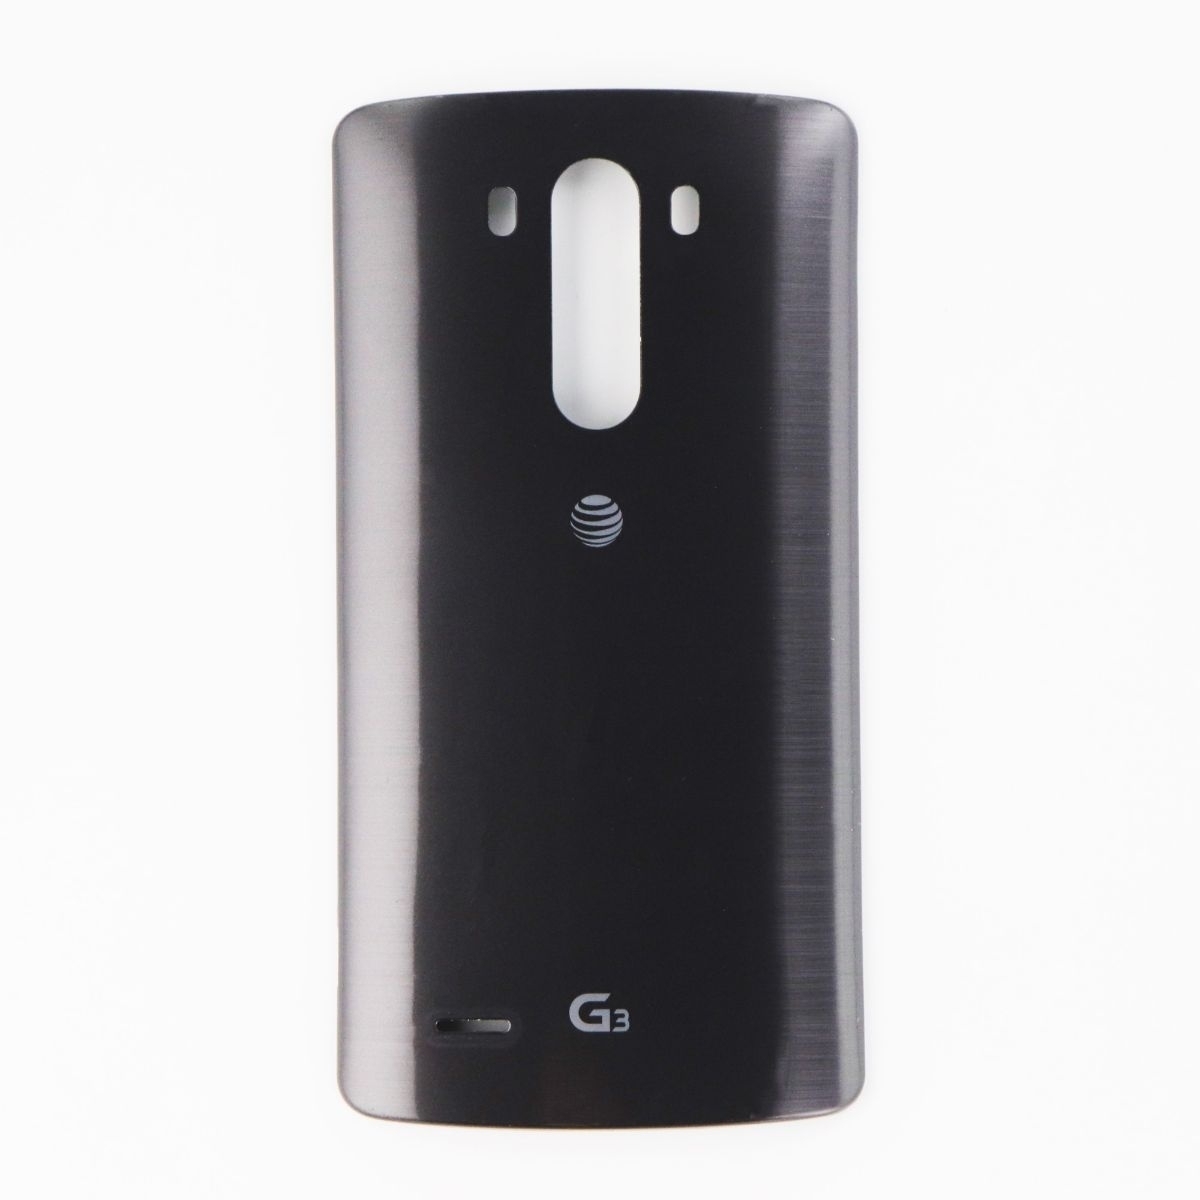 LG Replacement OEM Battery Door Cover For LG G3 (AT&&) - Metallic Gray